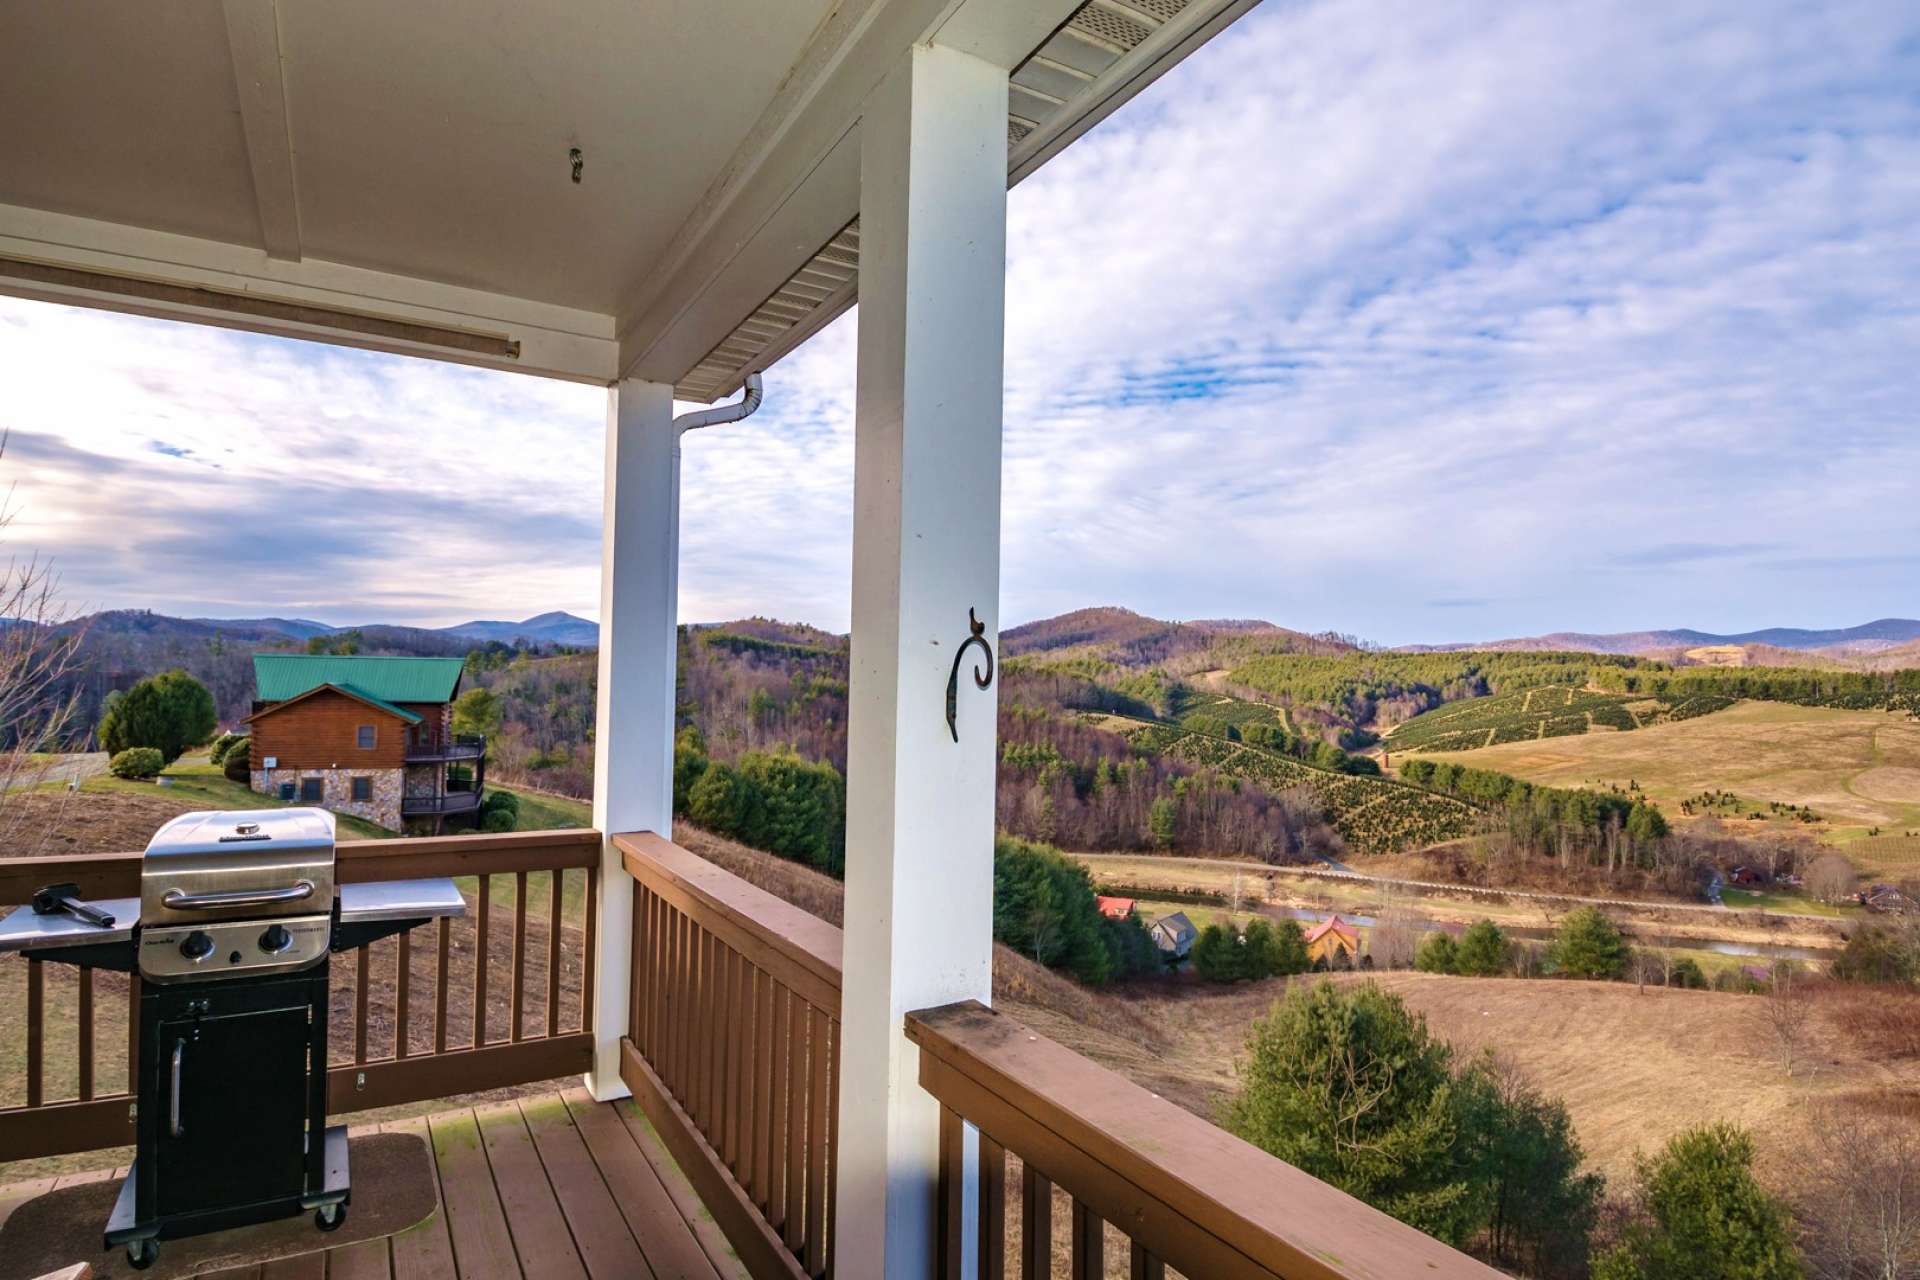 The covered back deck is an ideal location to relax with your favorite beverage and enjoy the views. Savor the majesty of the mountains and the serenity of the river as it flows through the community.